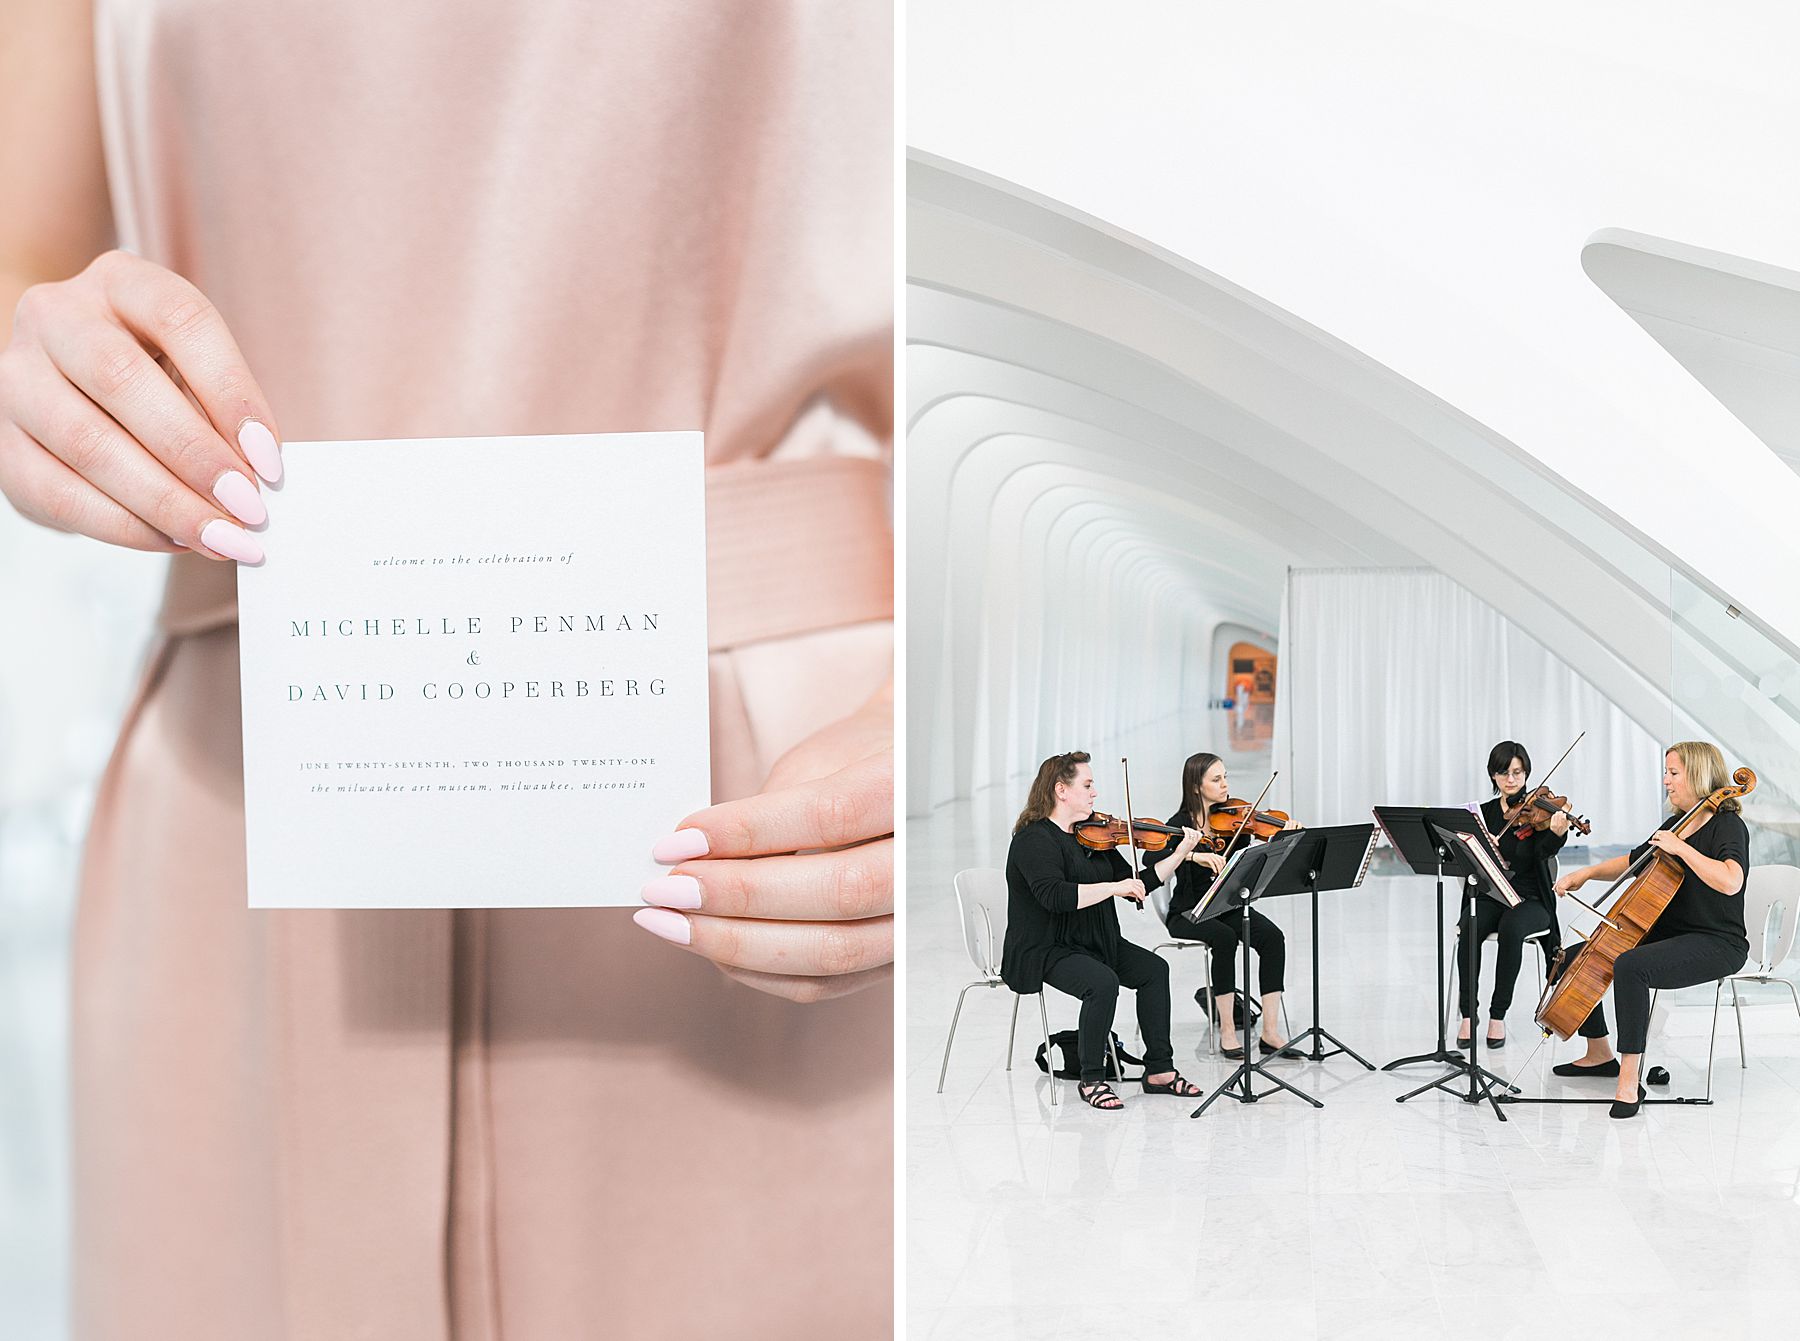 wedding invitation simple modern and white with wedding ceremony orchestra quartet live music